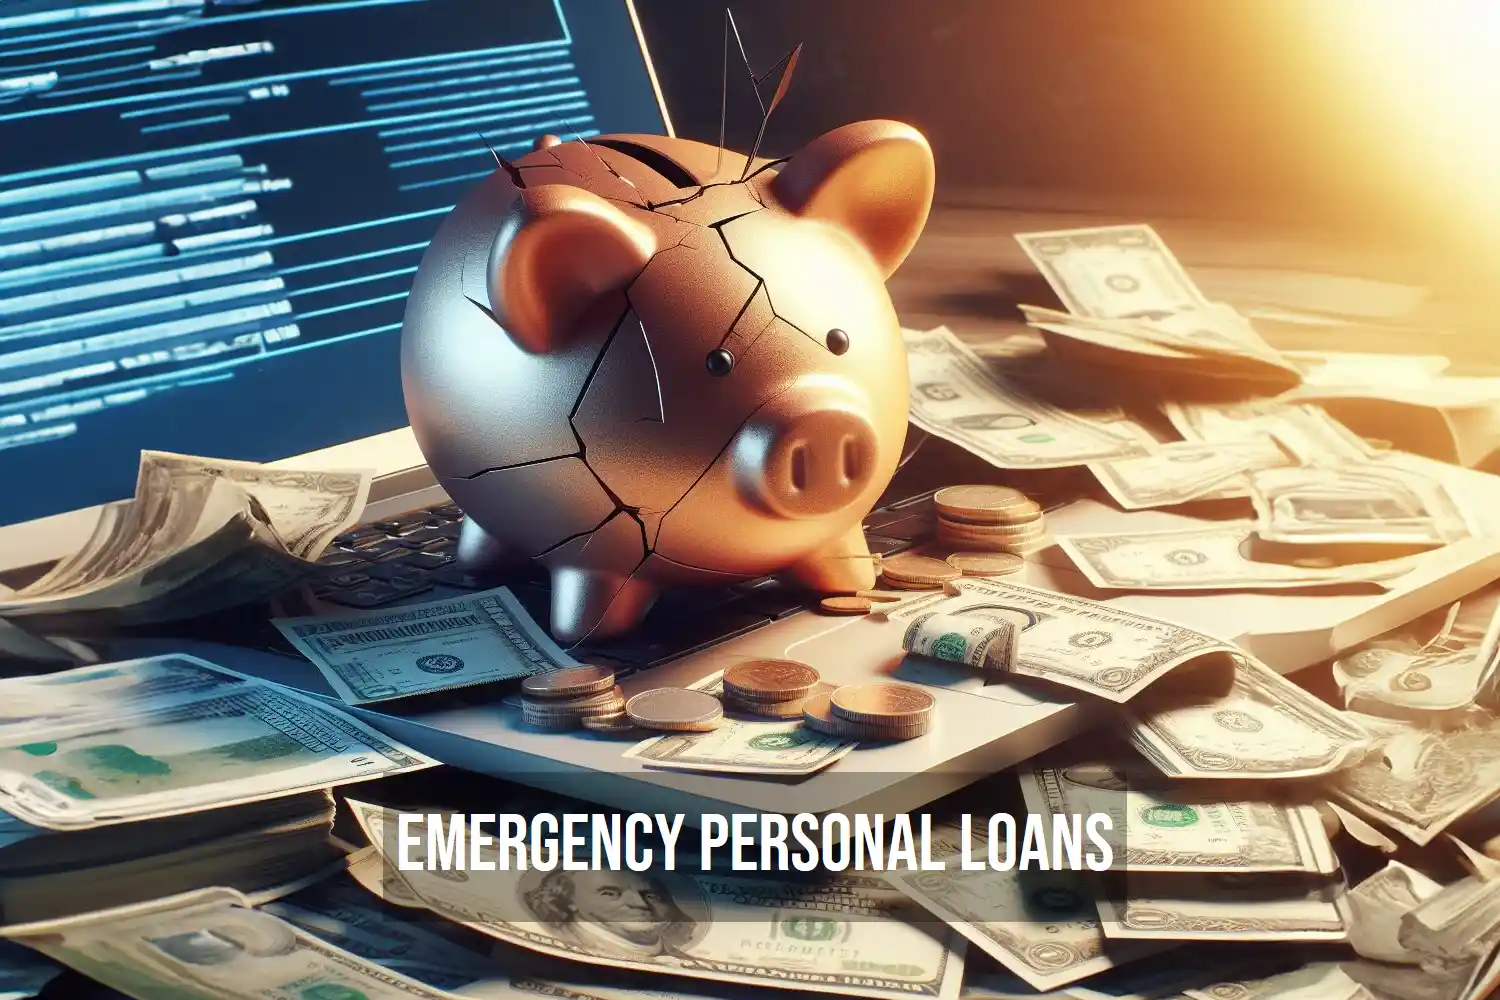 Emergency Personal Loans: Relief for Unexpected Bills